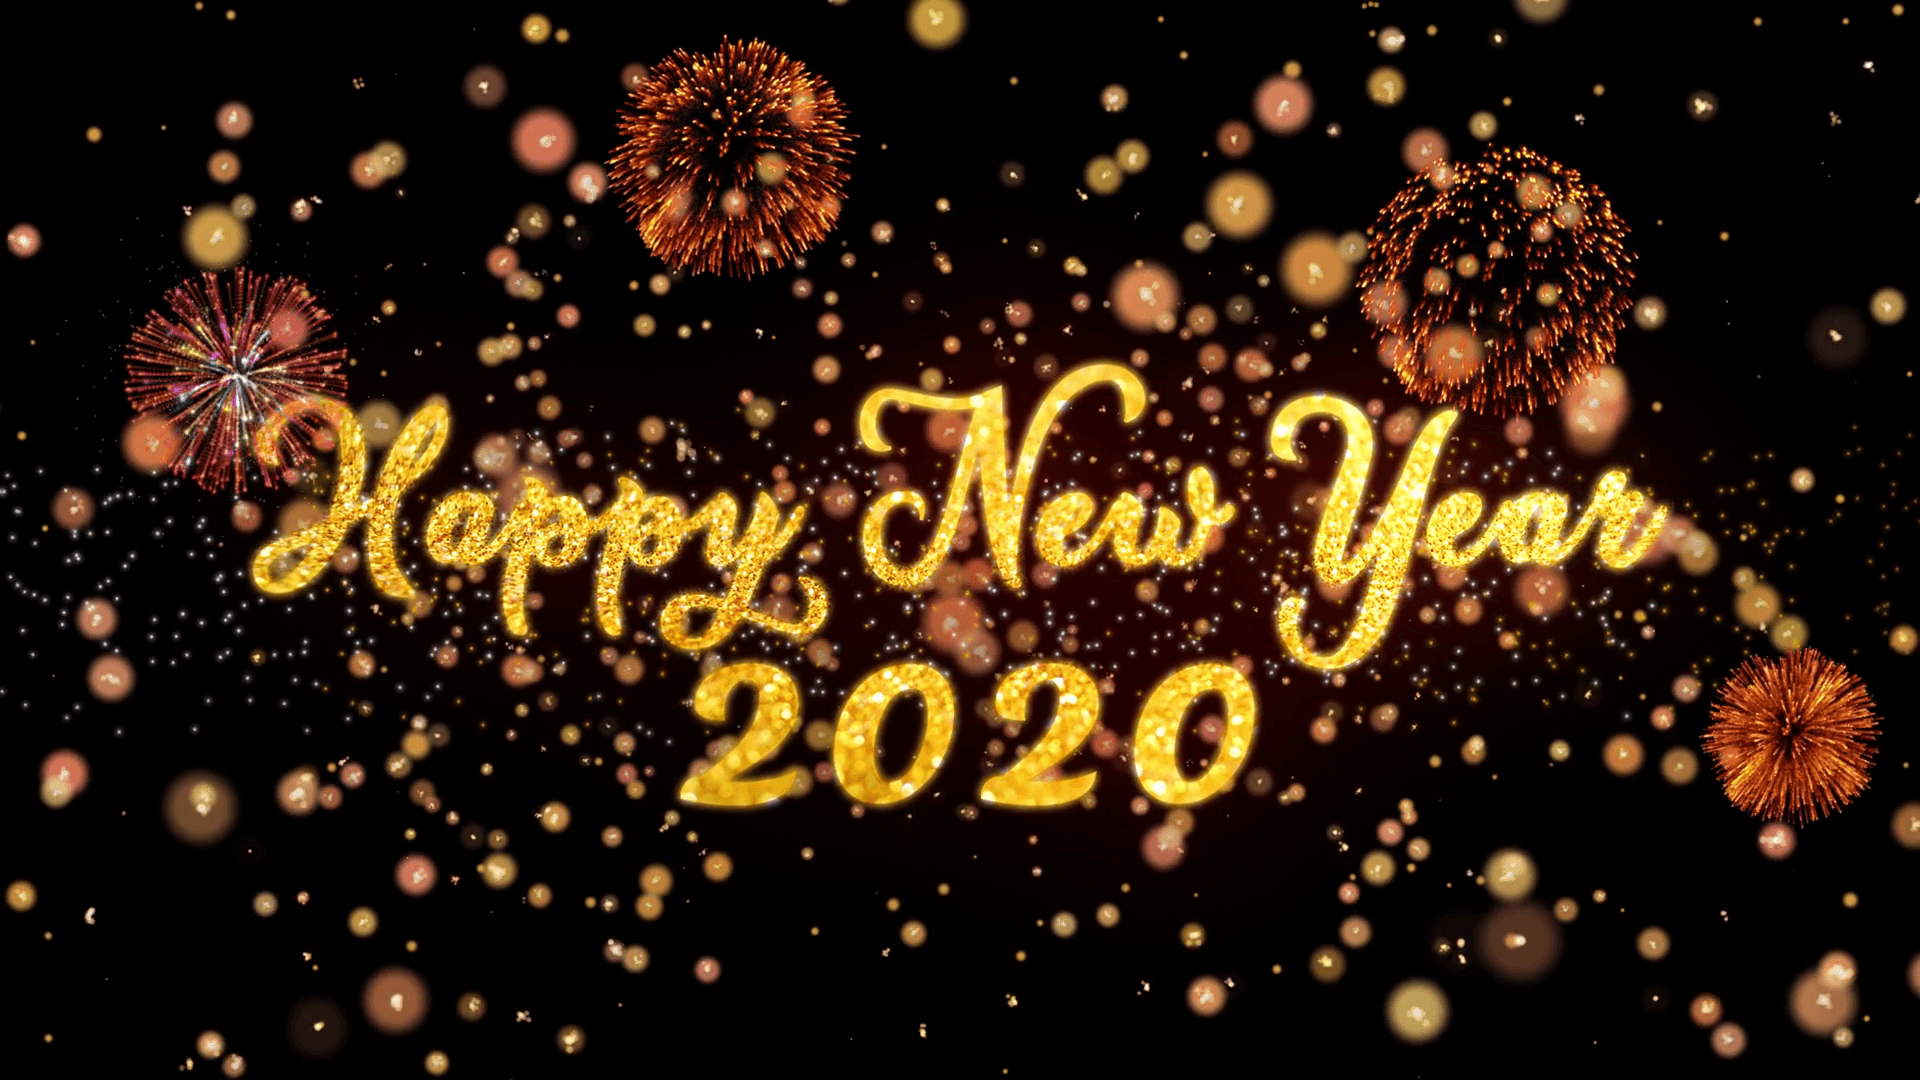 Happy New Year 2020 contain dp and status along